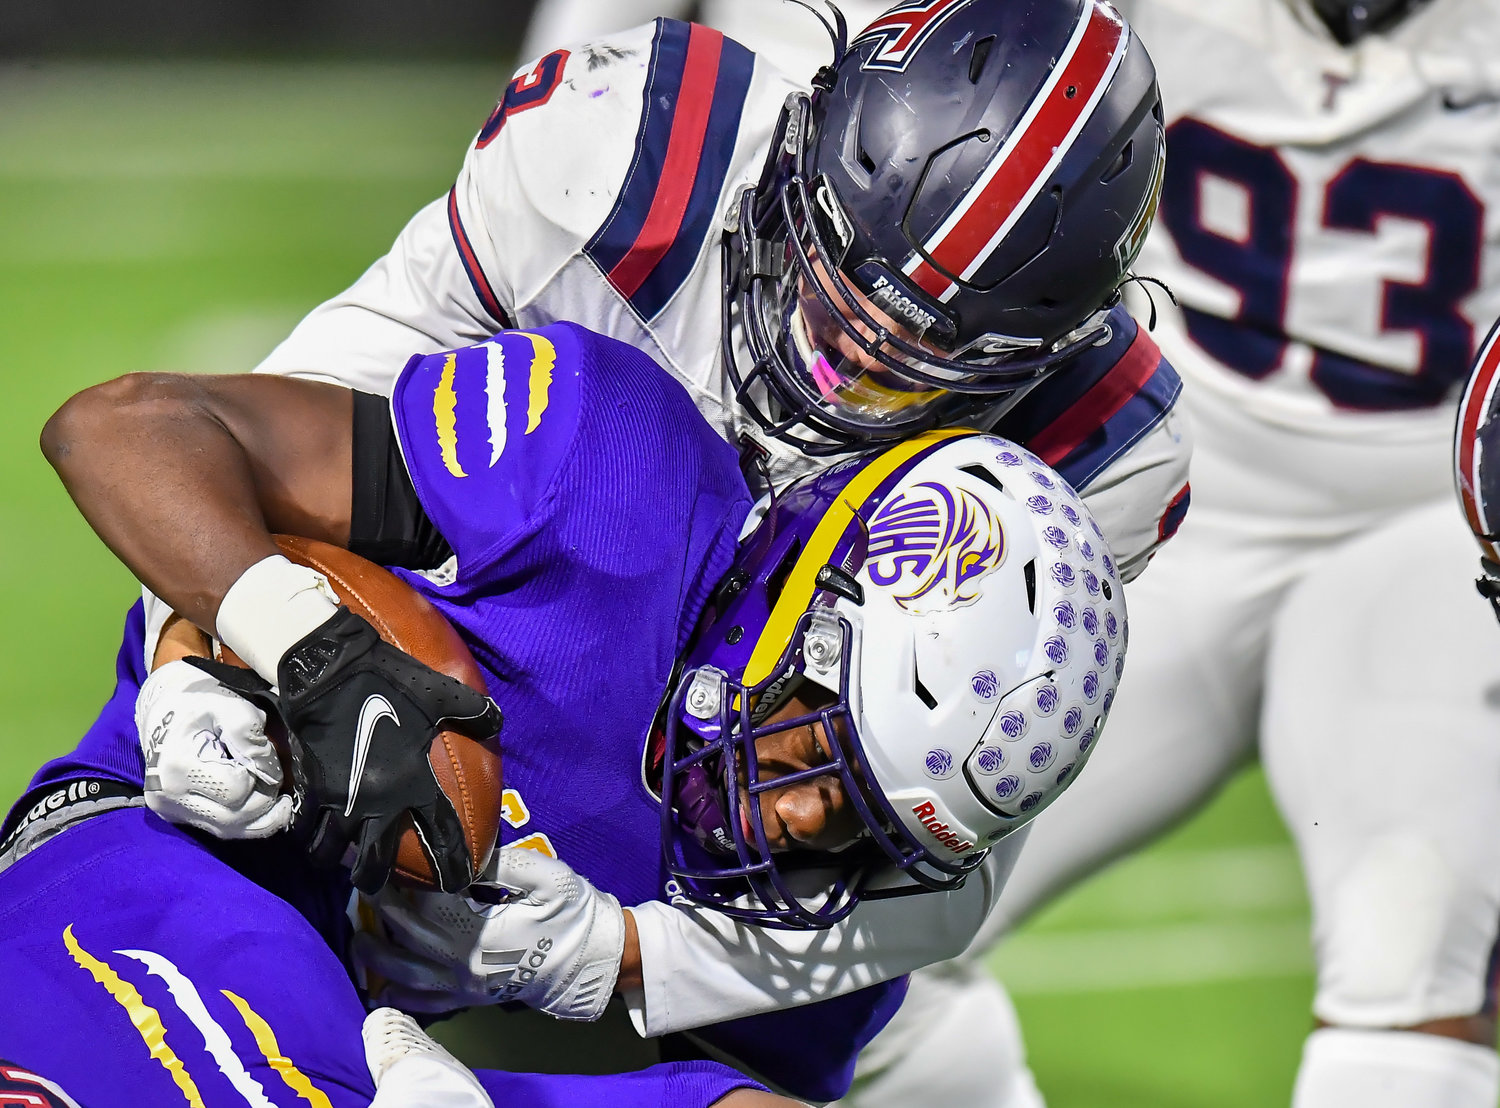 Houston Tx. Nov 19, 2021: Tompkins #3 Cole Binkley makes the stop on a Jersey Village runner during the UIL area playoff game between Tompkins and Jersey Village at Pridgeon Stadium in Houston. (Photo by Mark Goodman / Katy Times)